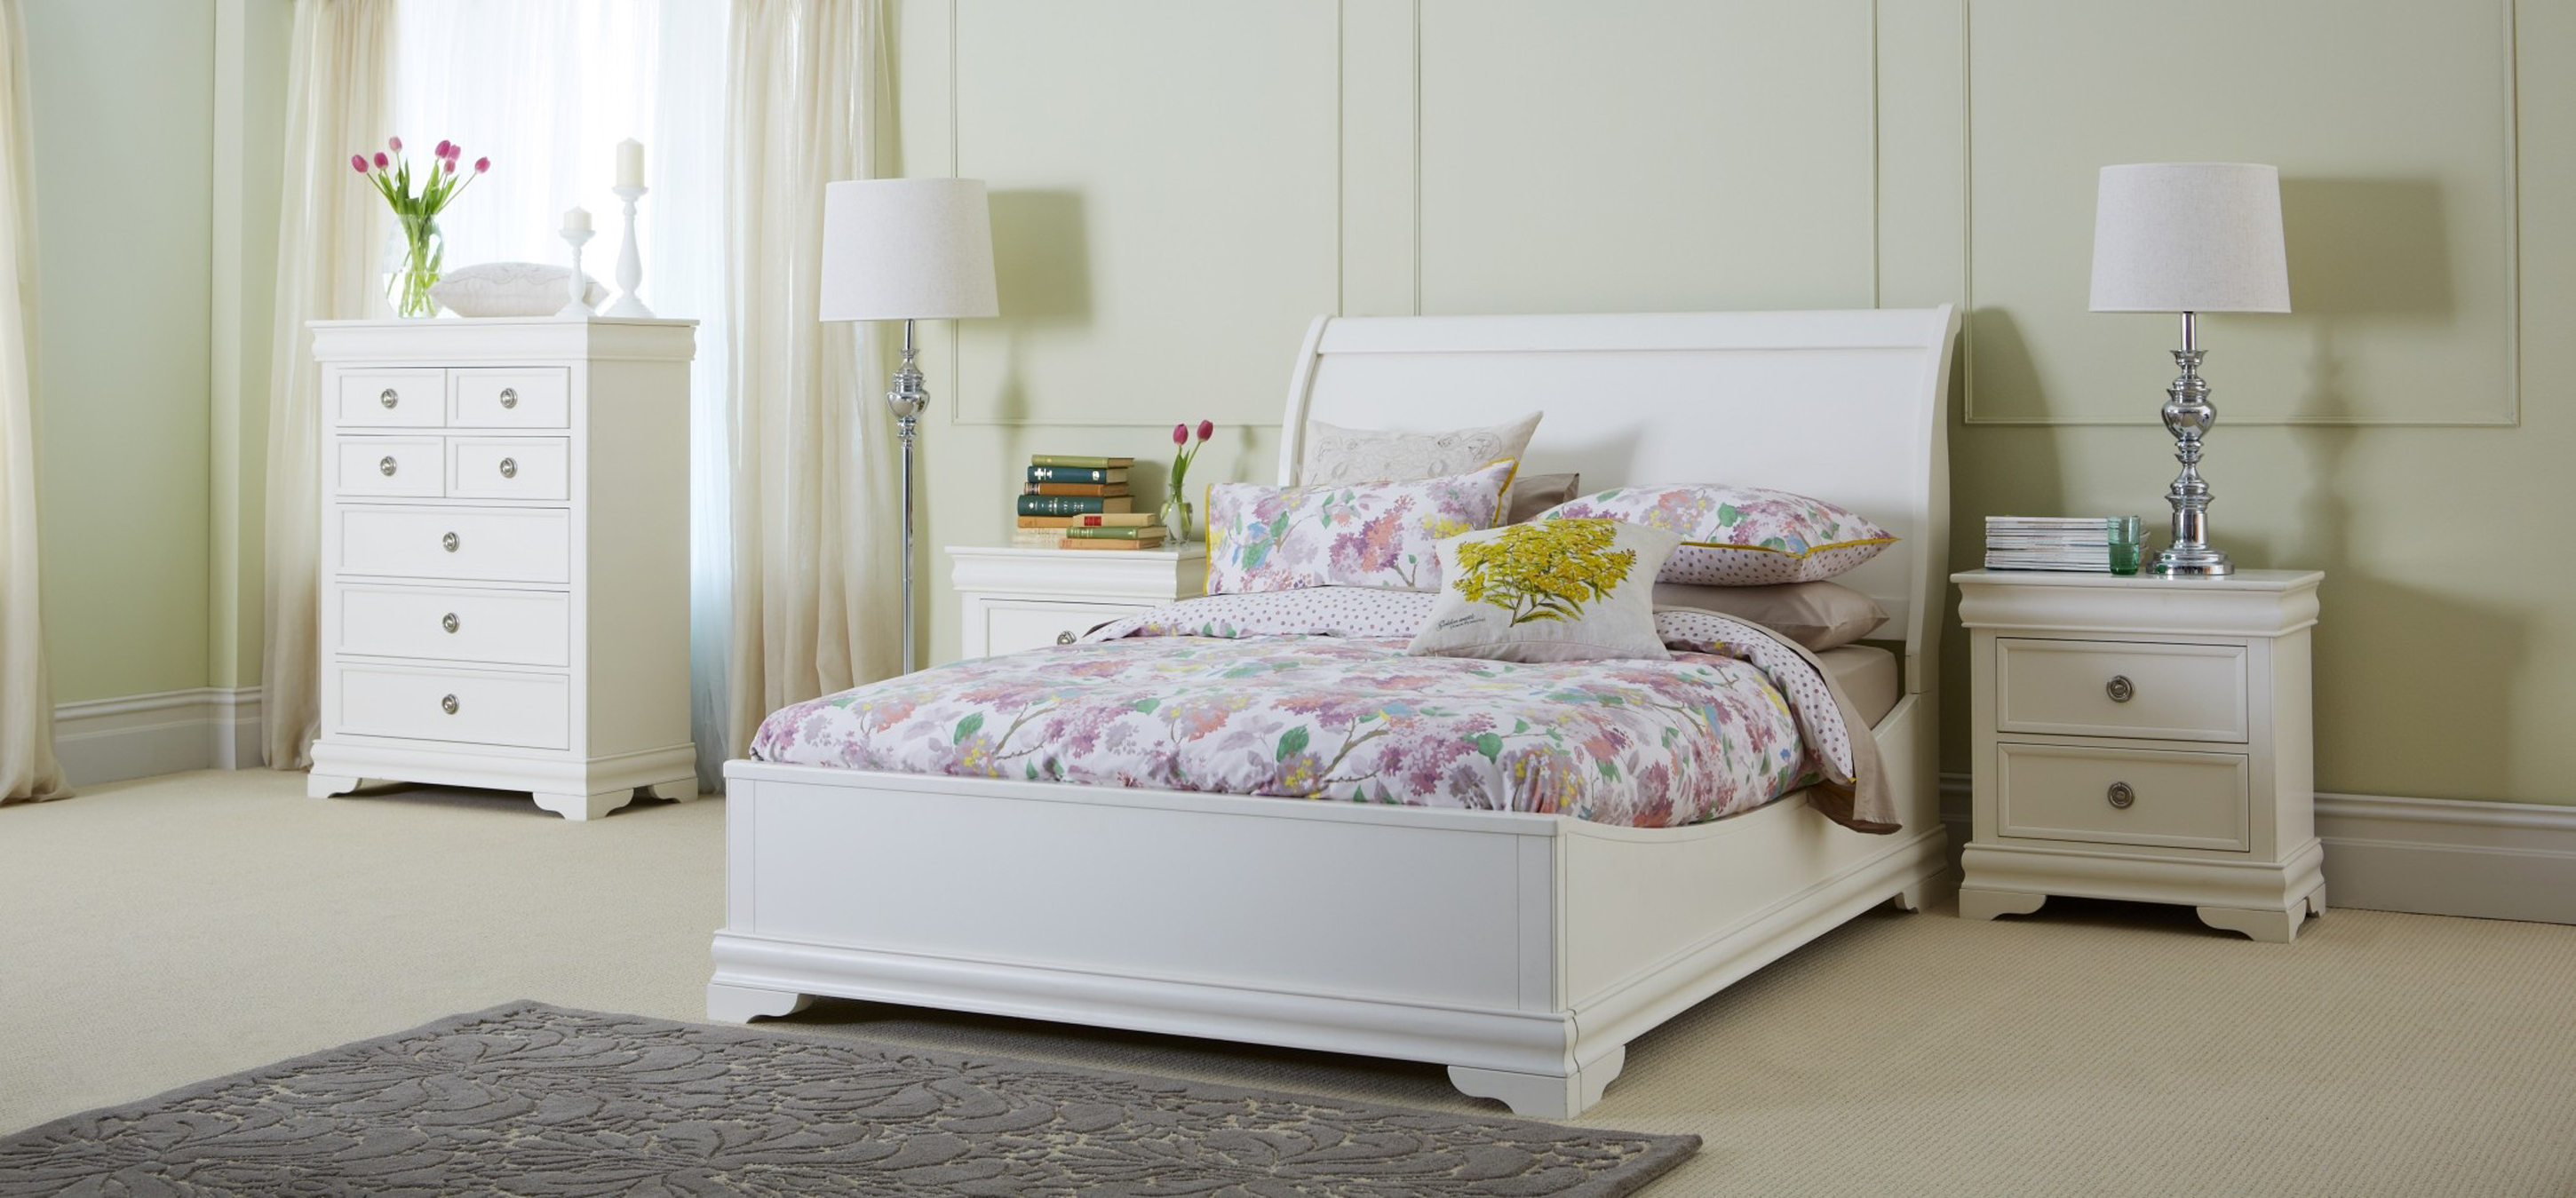 quality bedroom furniture for kids photo - 7